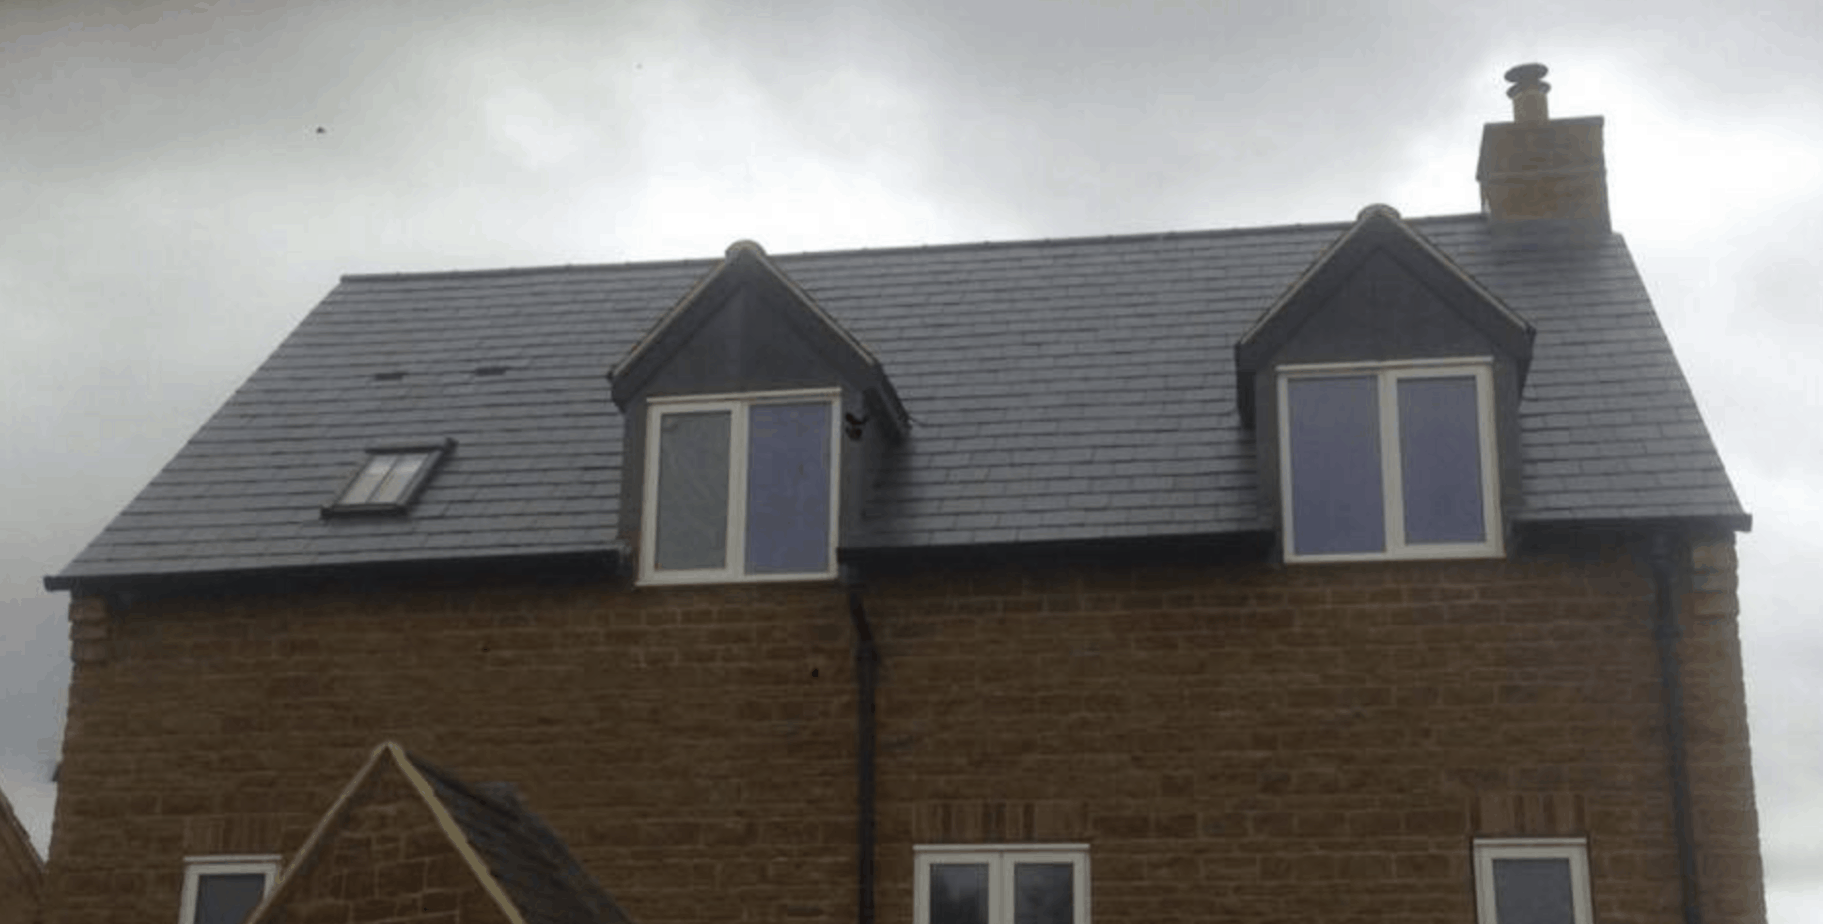 Pitched Roofs Northampton - Pitched Roofing - LD Roofing Services Ltd